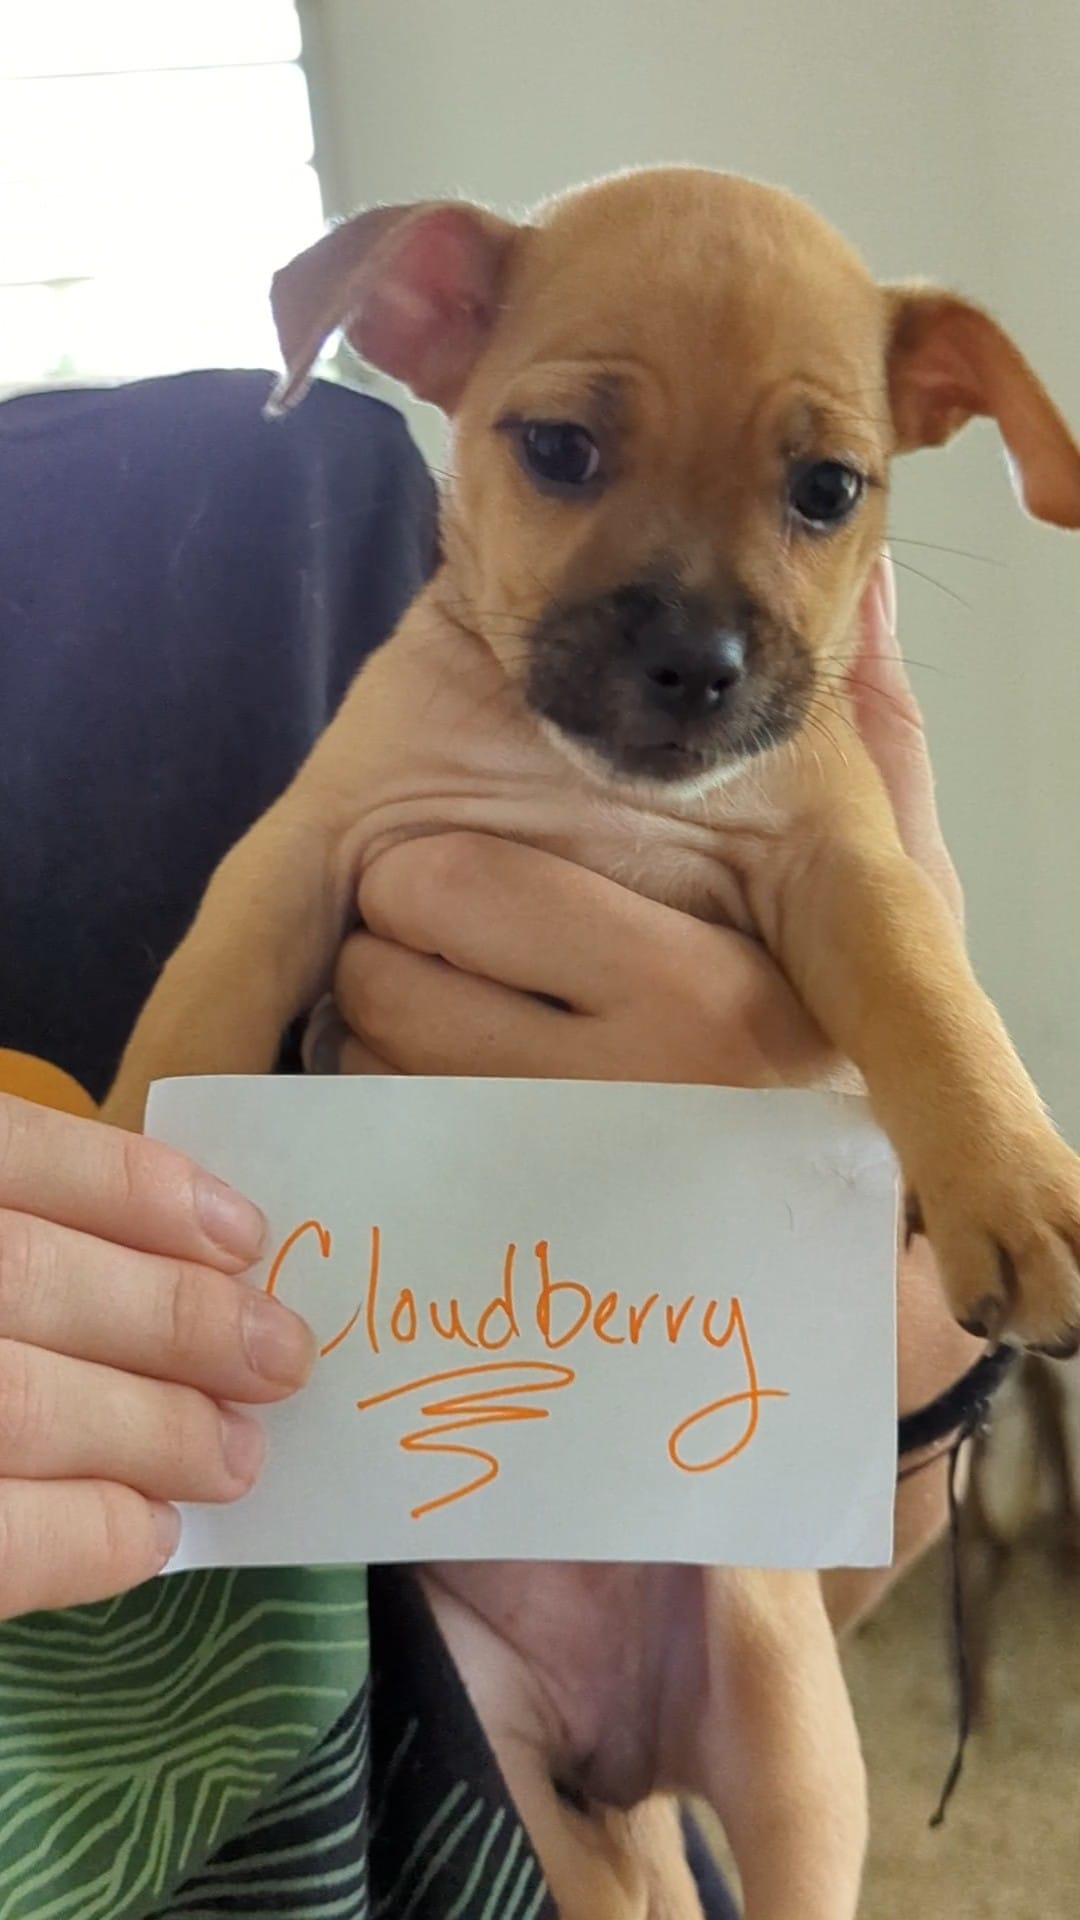 man holding a puppy and a paper with his name